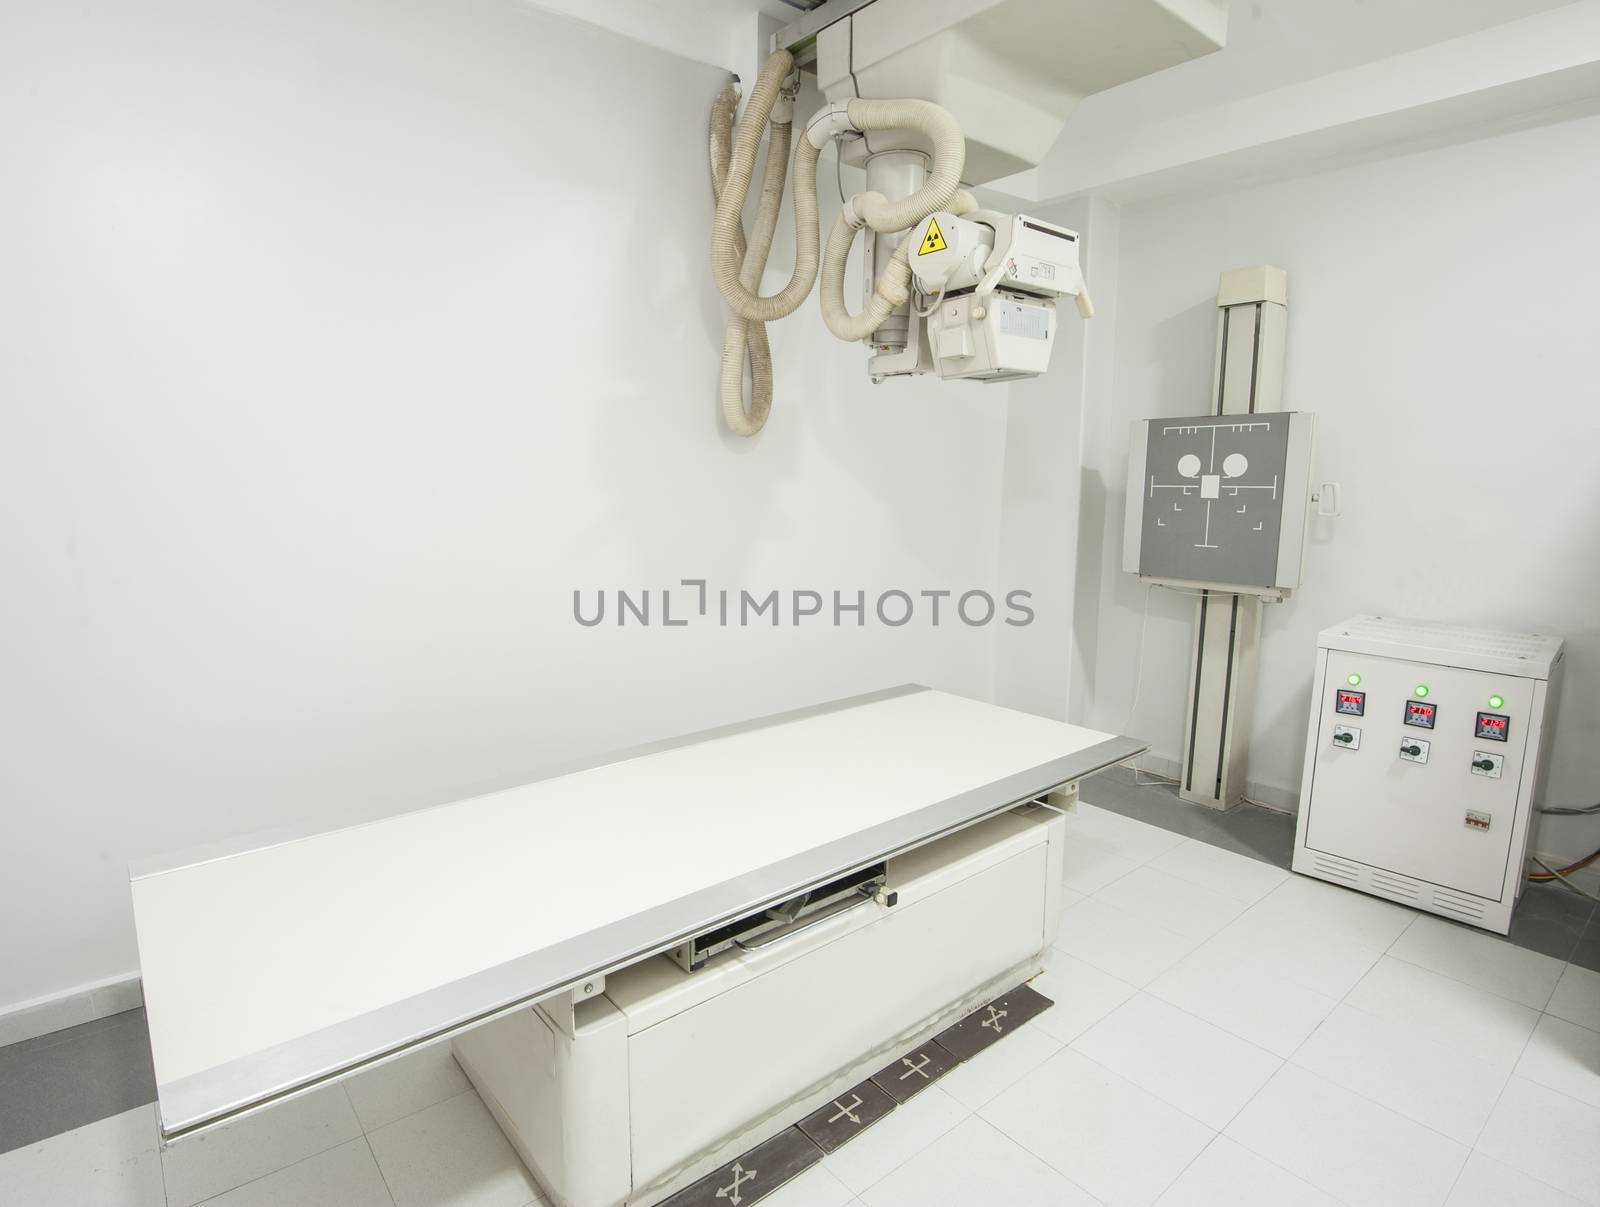 X-ray machine in hospital medical center by paulvinten